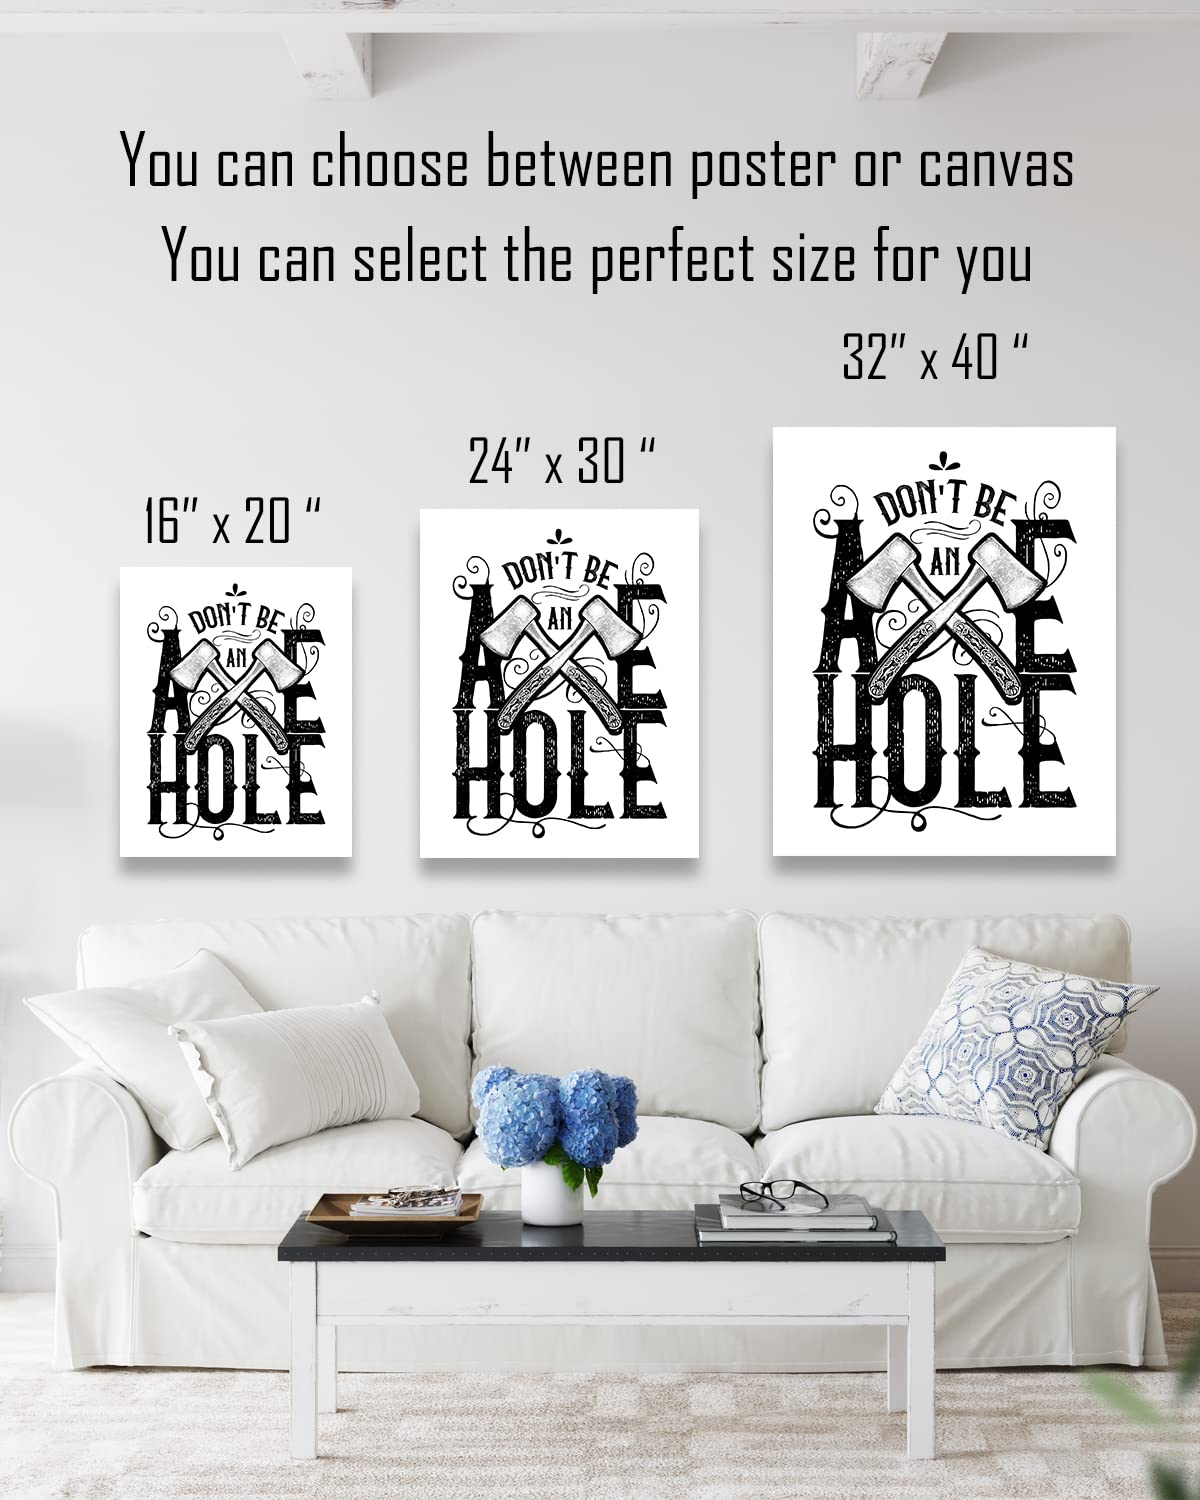 Don't Be An Axe Hole - Lumberjack Decorations for Home - Rustic Man Cave Decor - Funny Gifts for Lumberjacks